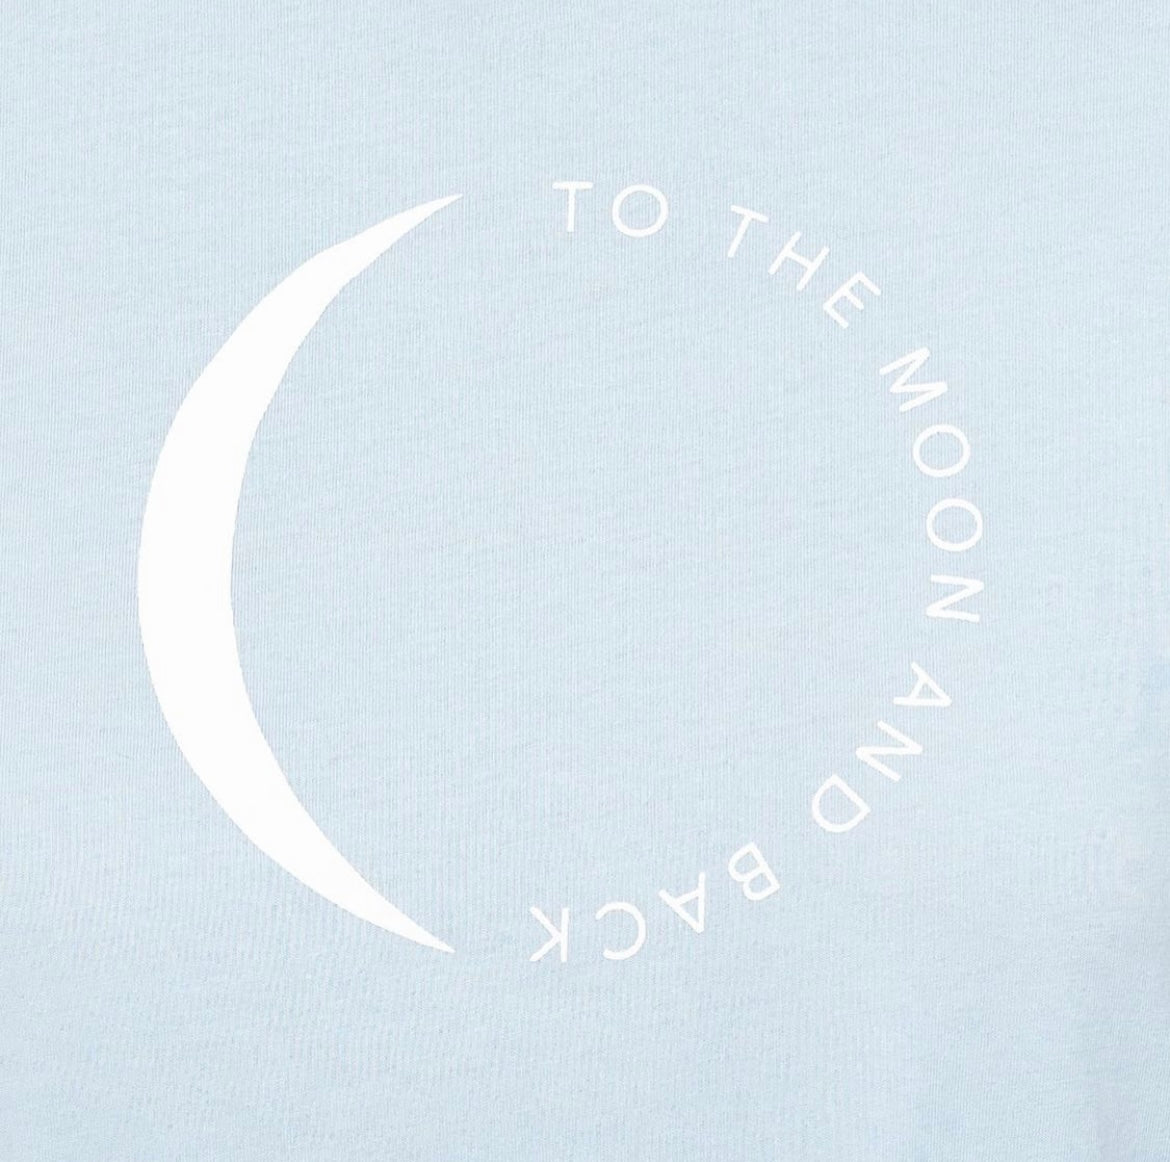 Paper Heart - To The Moon And Back Tee